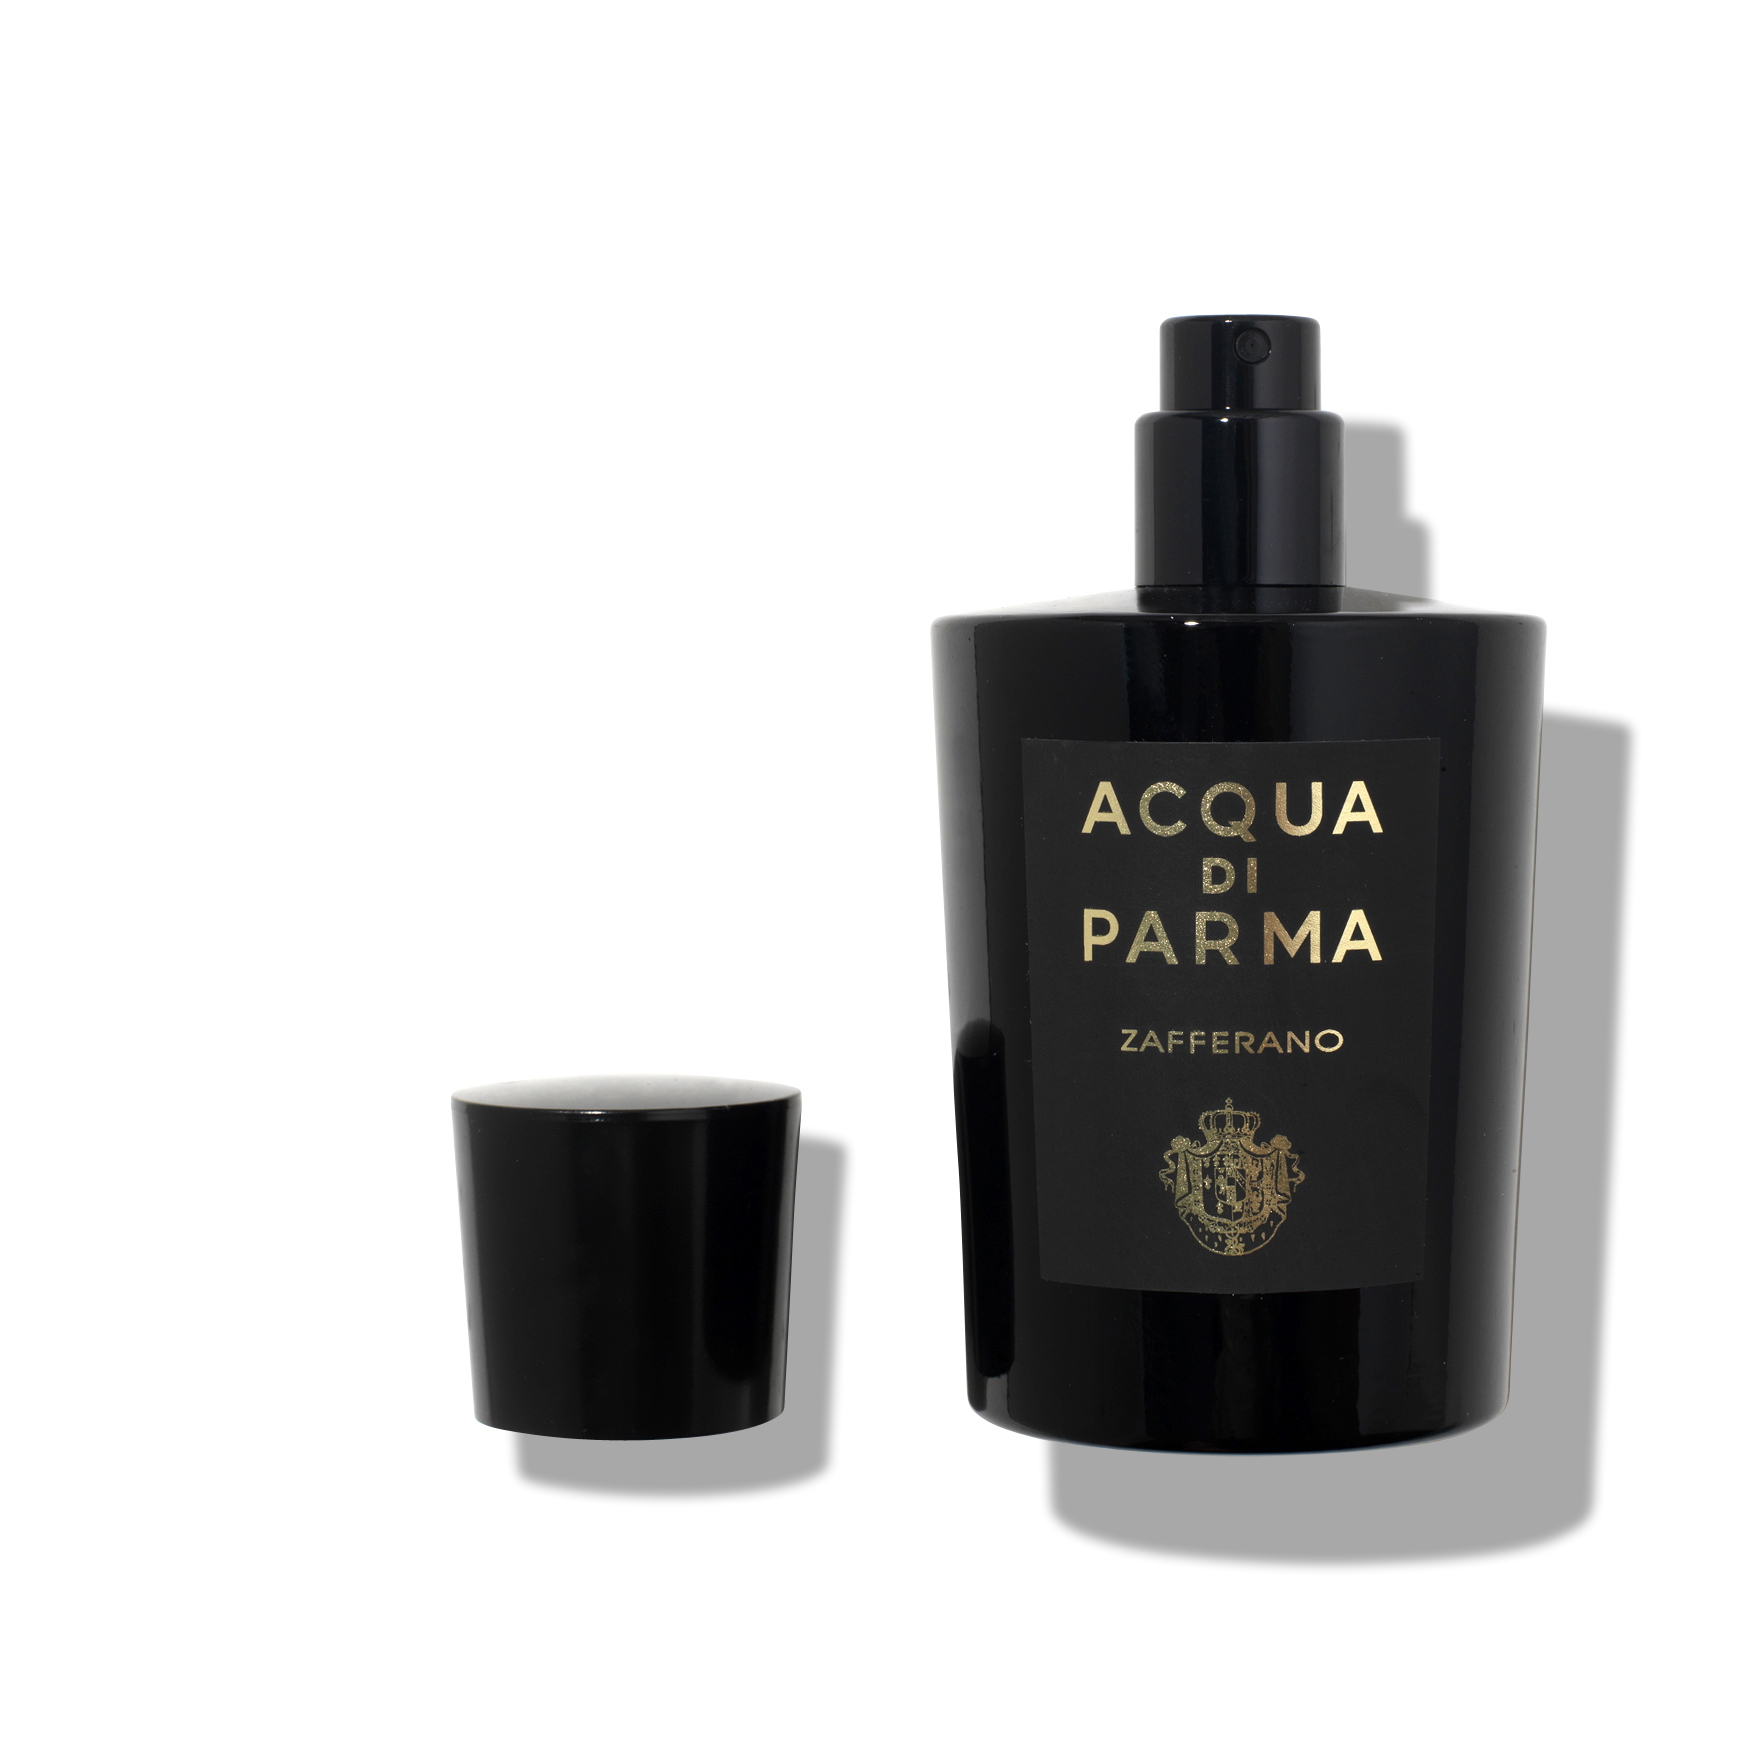 Acqua Di Parma Oud is the best Oud Cologne for summer in my opinion :  r/Colognes